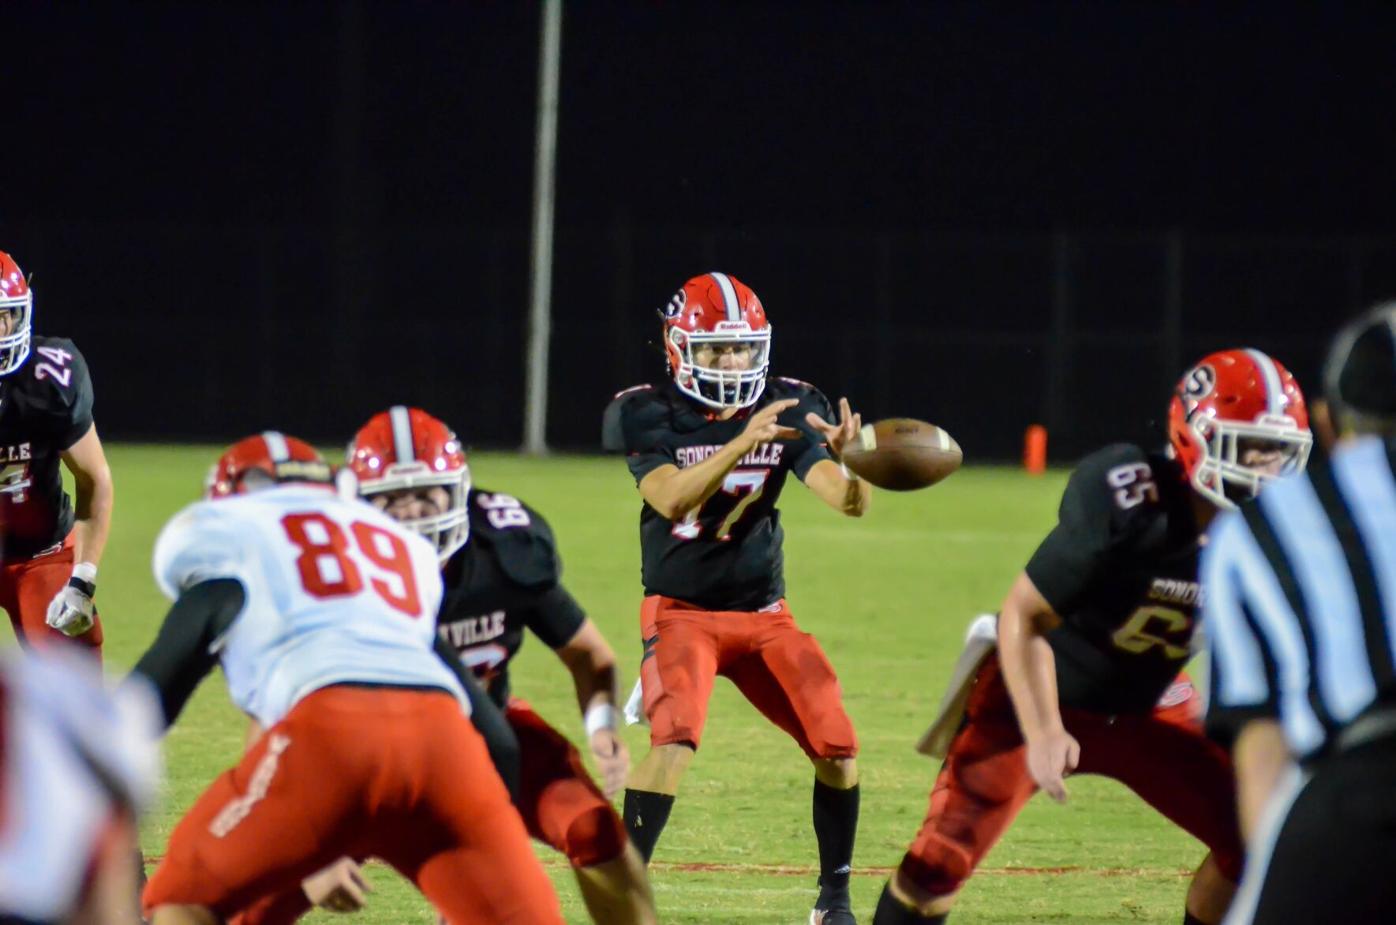 Sonoraville handles LFO on homecoming